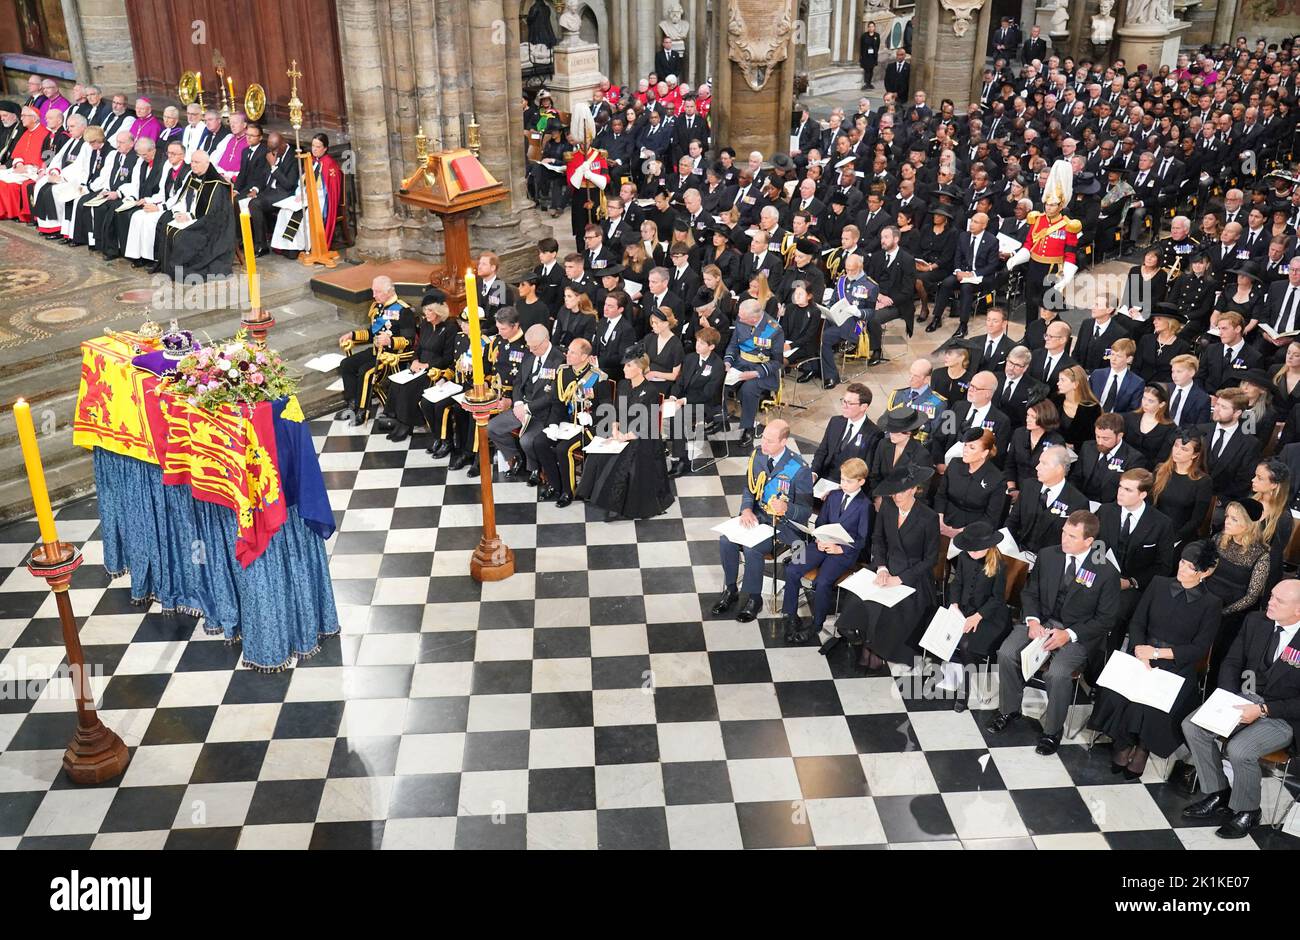 (front row) King Charles III, the Queen Consort, the Princess Royal, Vice Admiral Sir Tim Laurence, the Duke of York, the Earl of Wessex, the Countess of Wessex, the Prince of Wales, Prince George, the Princess of Wales, Princess Charlotte, Peter Phillips, Zara Tindall and Mike Tindall in front of the coffin of Queen Elizabeth II during her State Funeral at the Abbey in London. Picture date: Monday September 19, 2022. Stock Photo